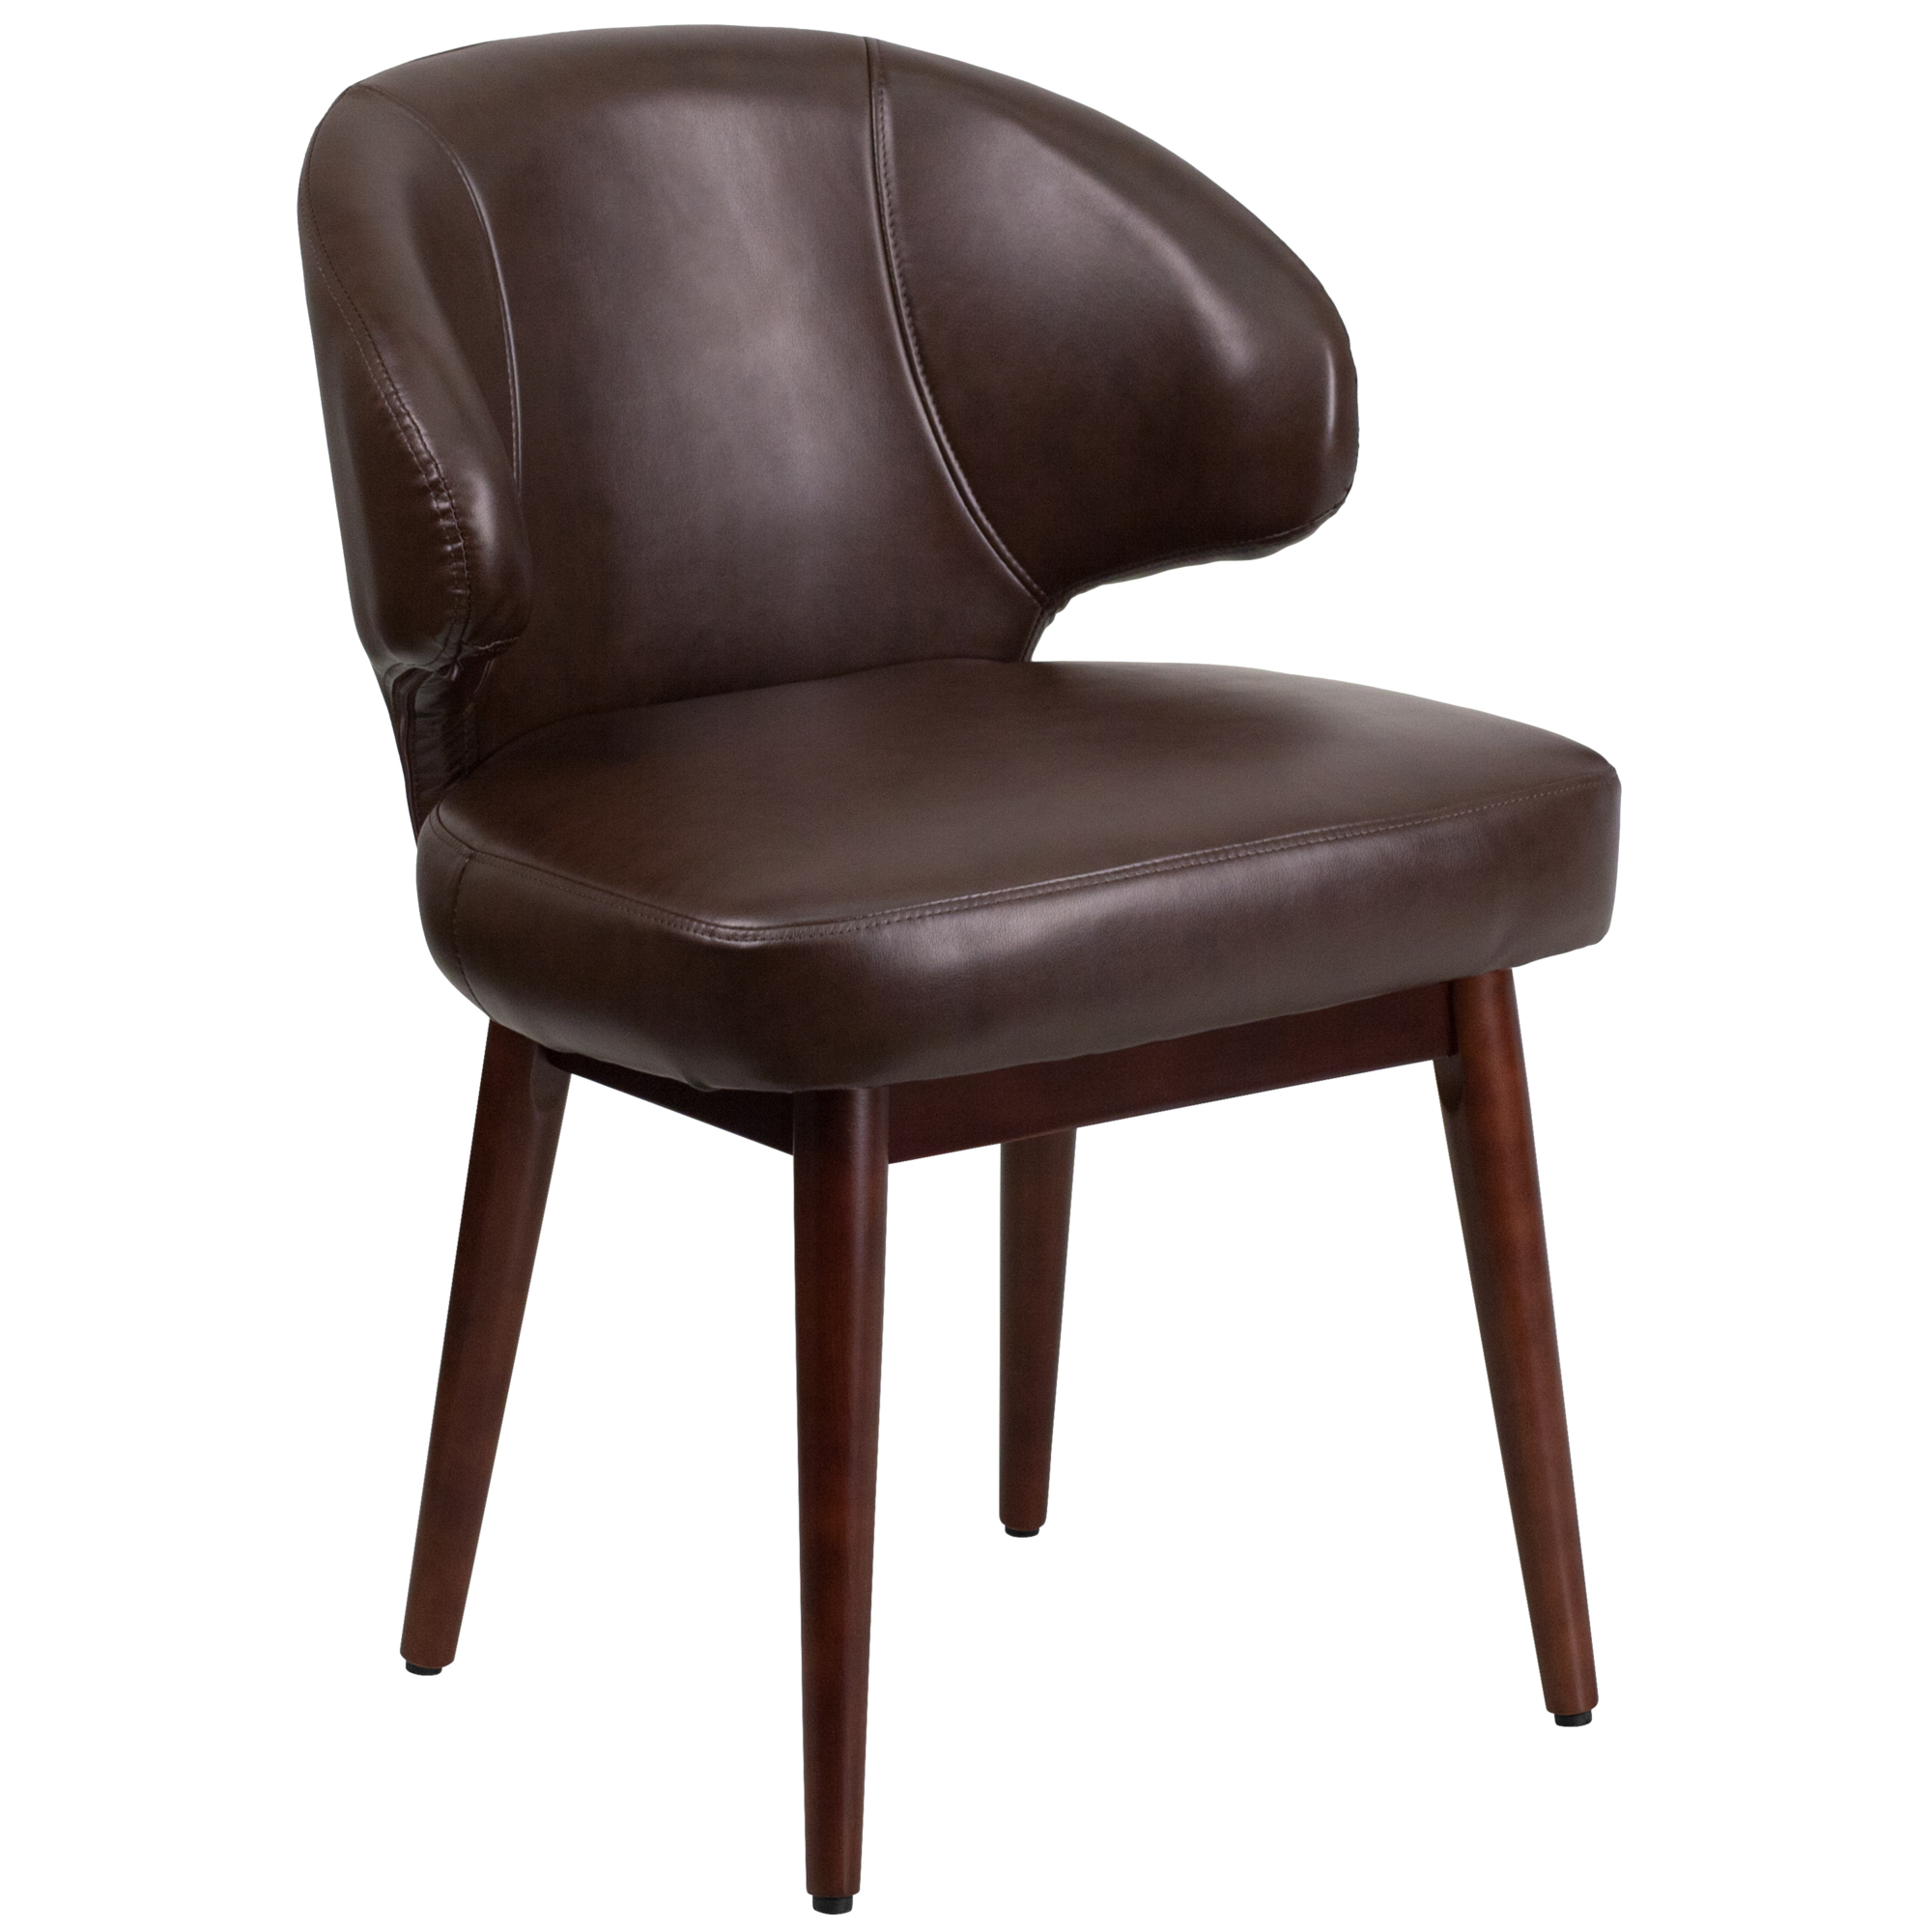 Flash Furniture, Brown LeatherSoft Reception Chair with Walnut Legs, Primary Color Brown, Included (qty.) 1, Model BT4BN